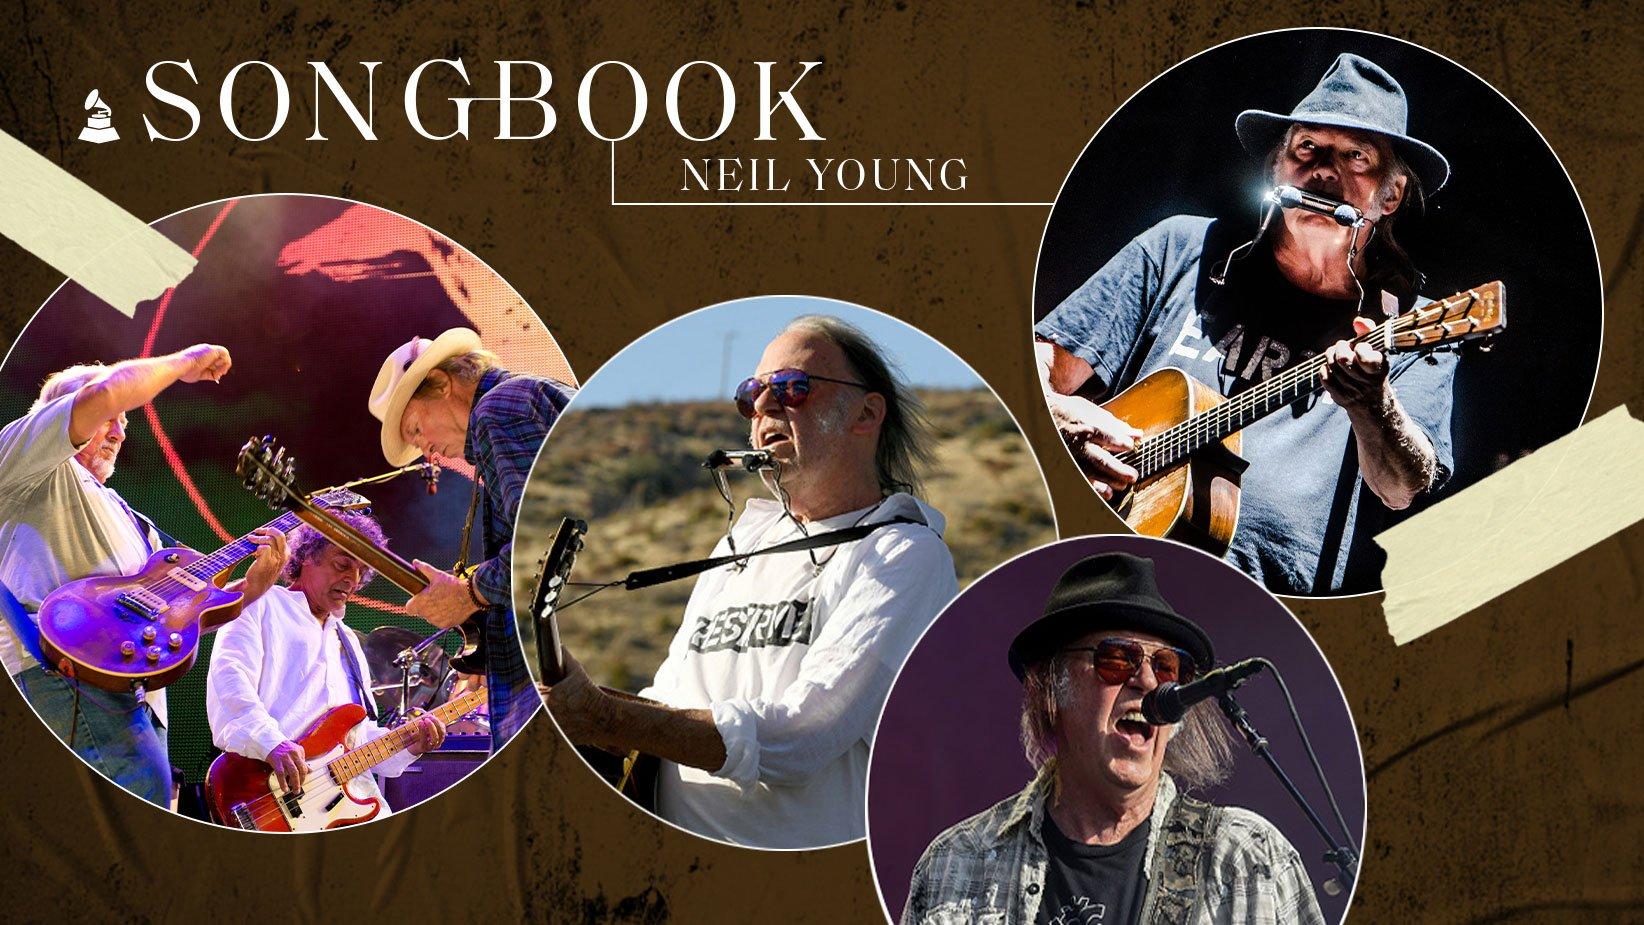 Songbook: Inside Neil Young's Latest Decade And Change, From